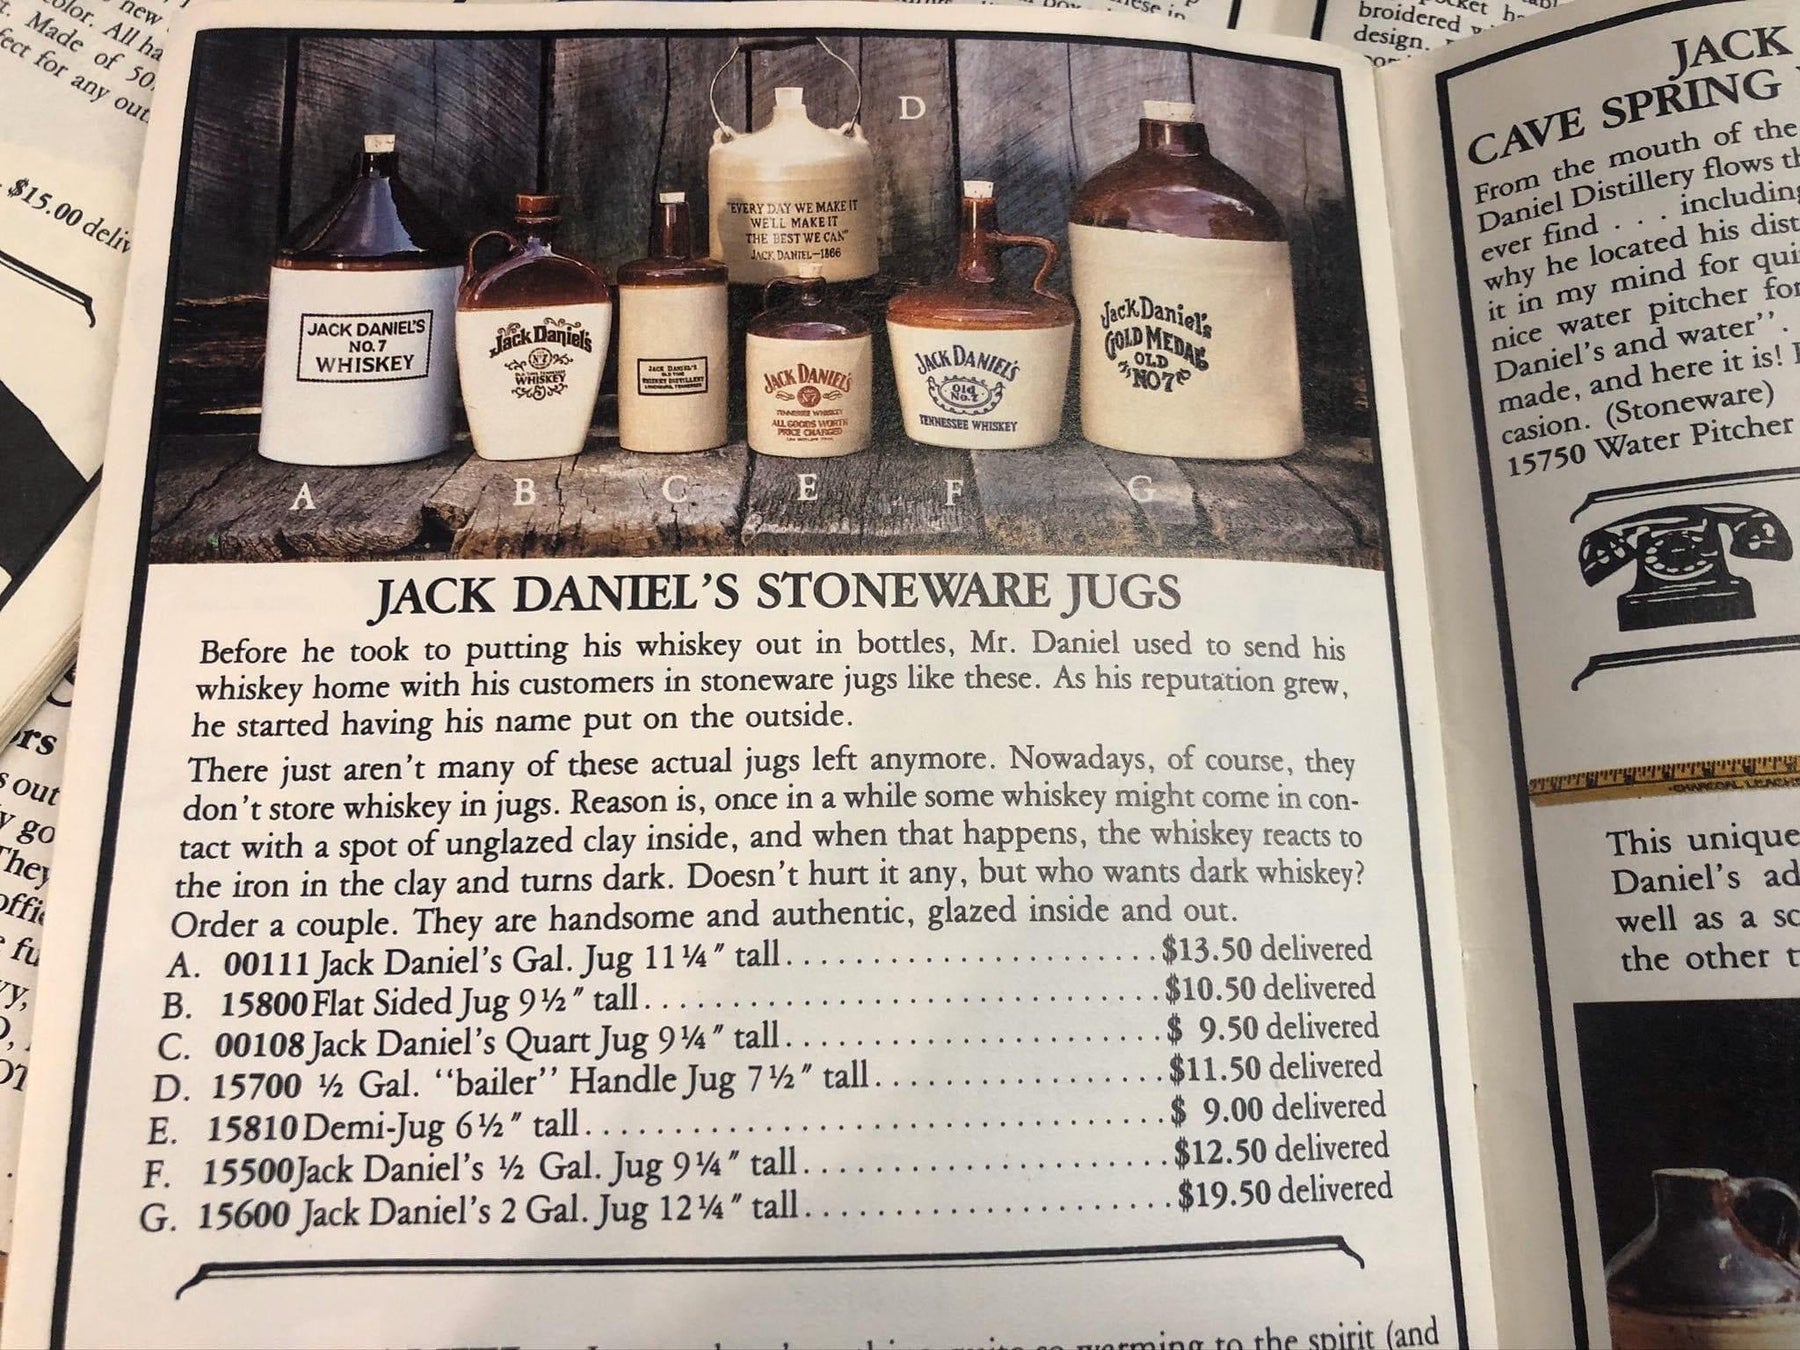 Vintage Jack Daniels Advertising Items - The Whiskey Cave